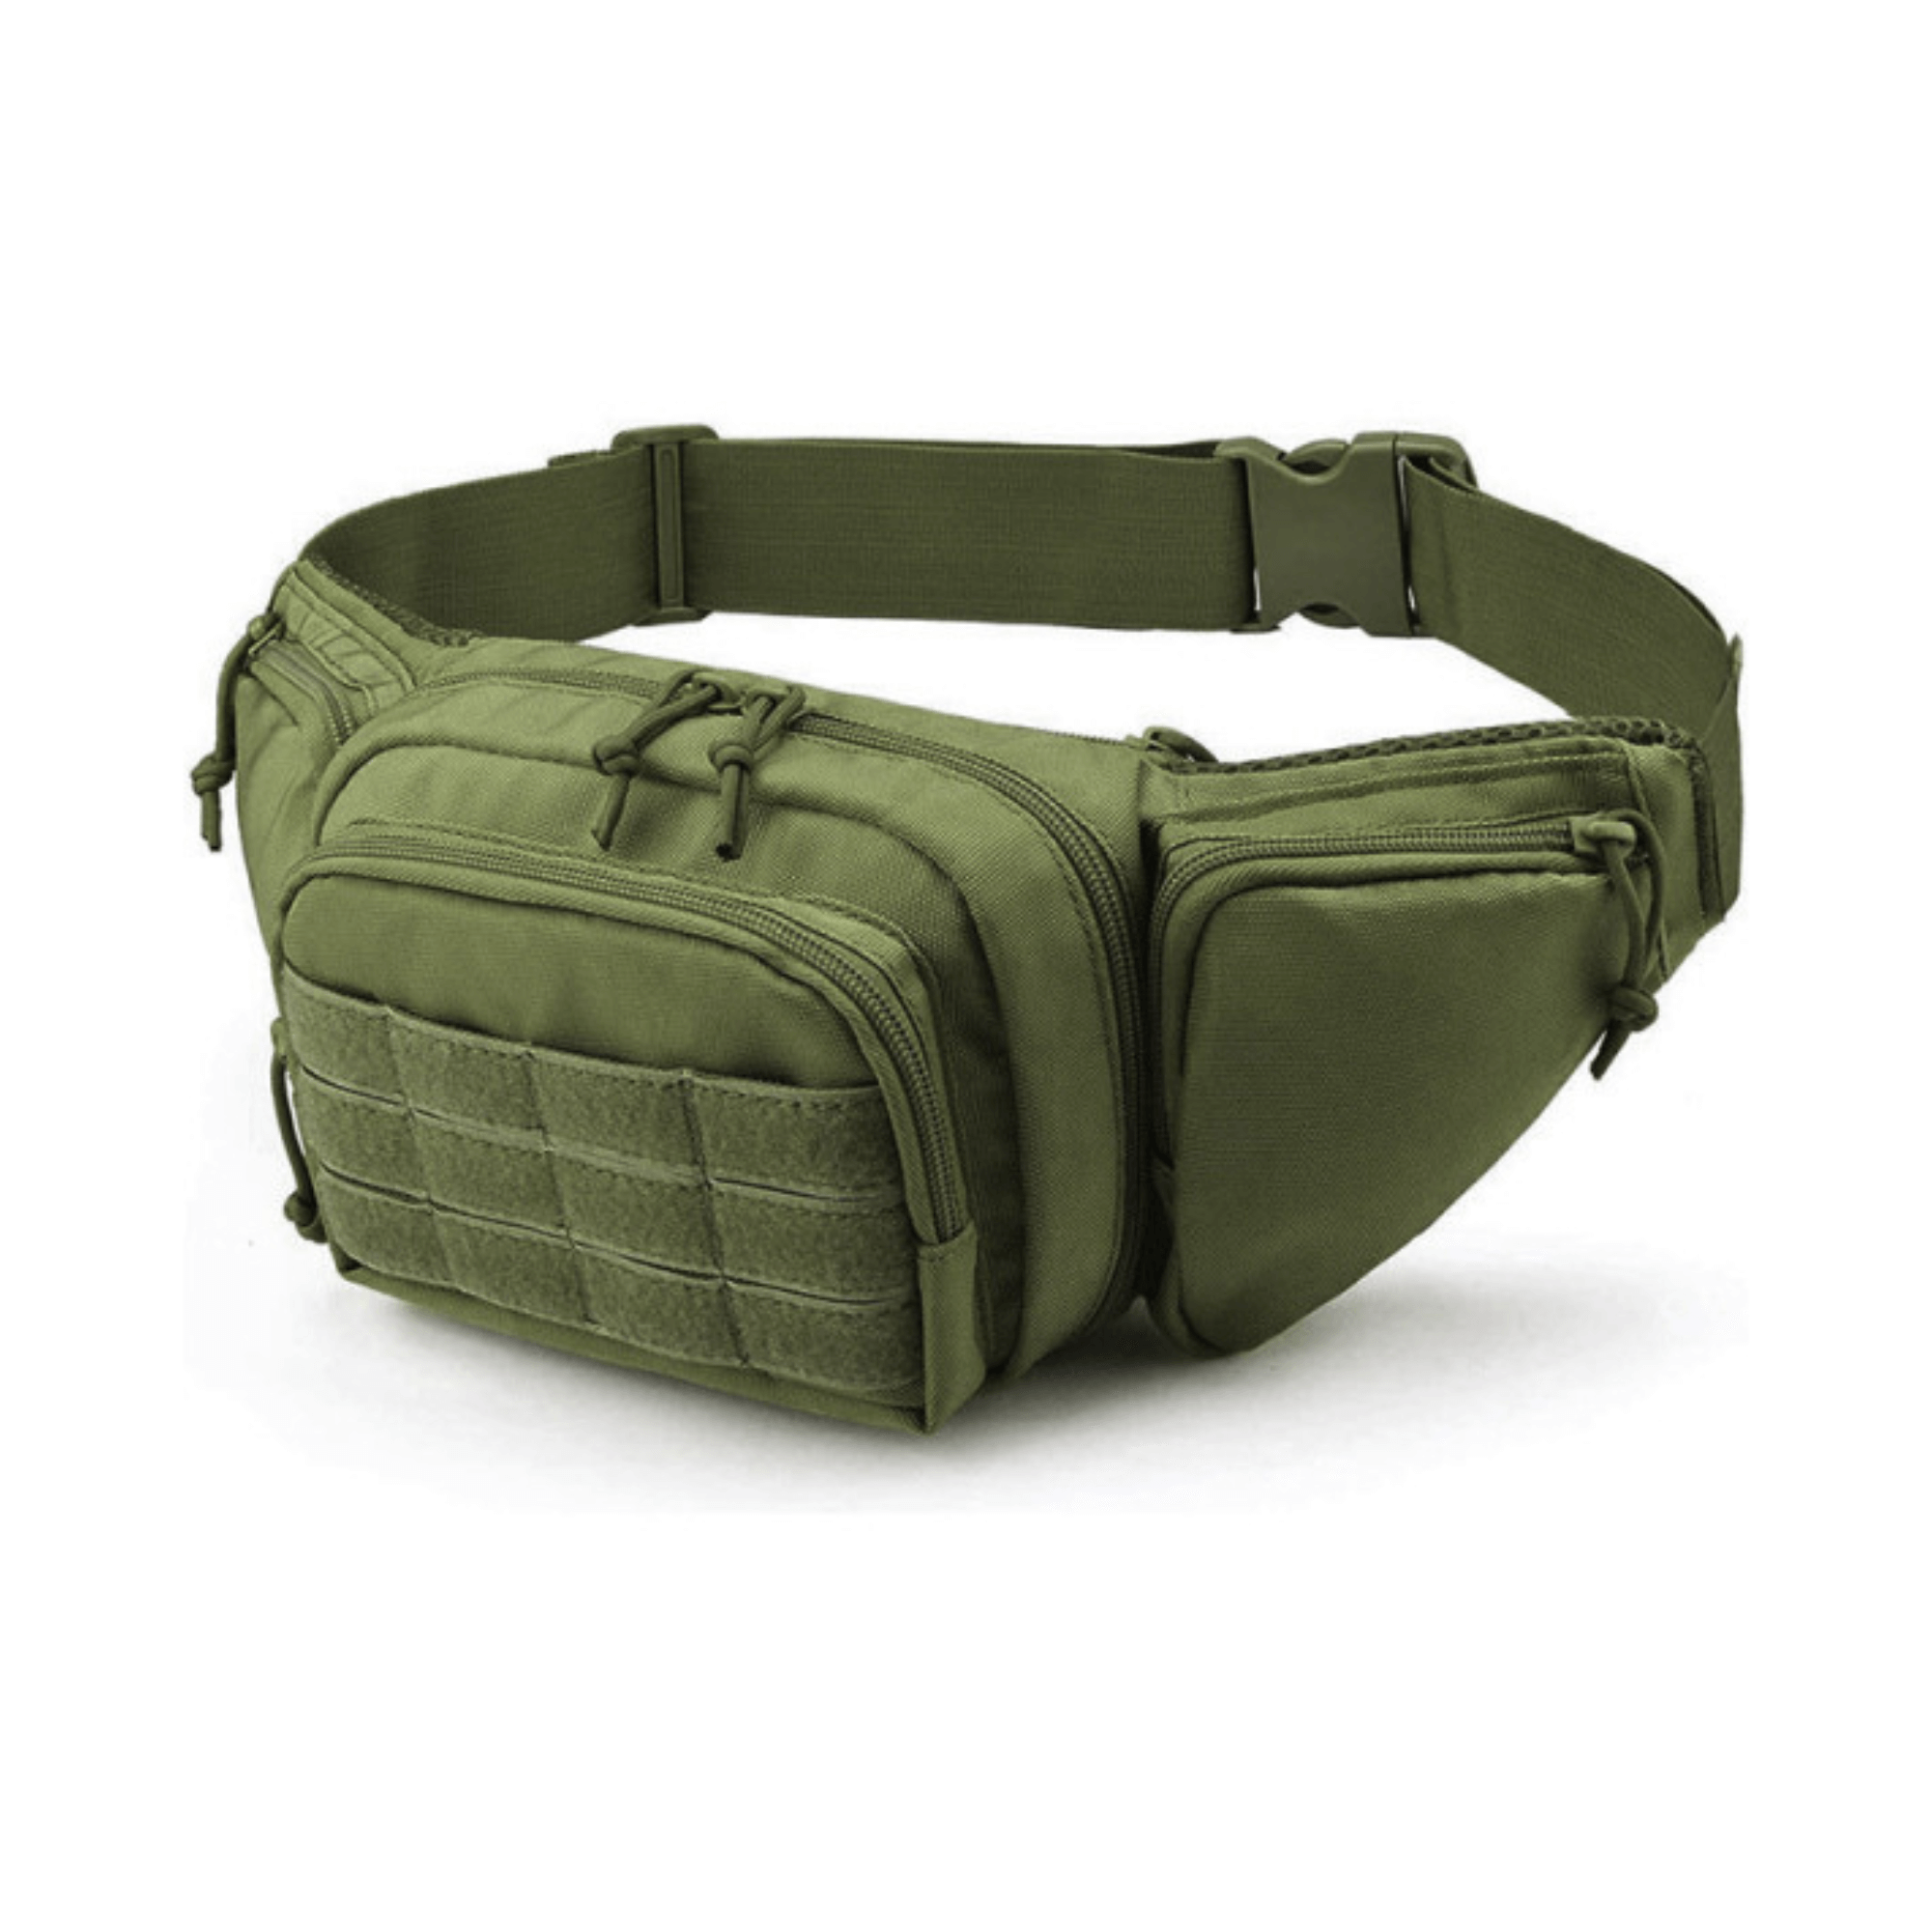 JupiterGear Tactical Military Waist Bag & Molle EDC Pouch for Outdoor Activities - Black